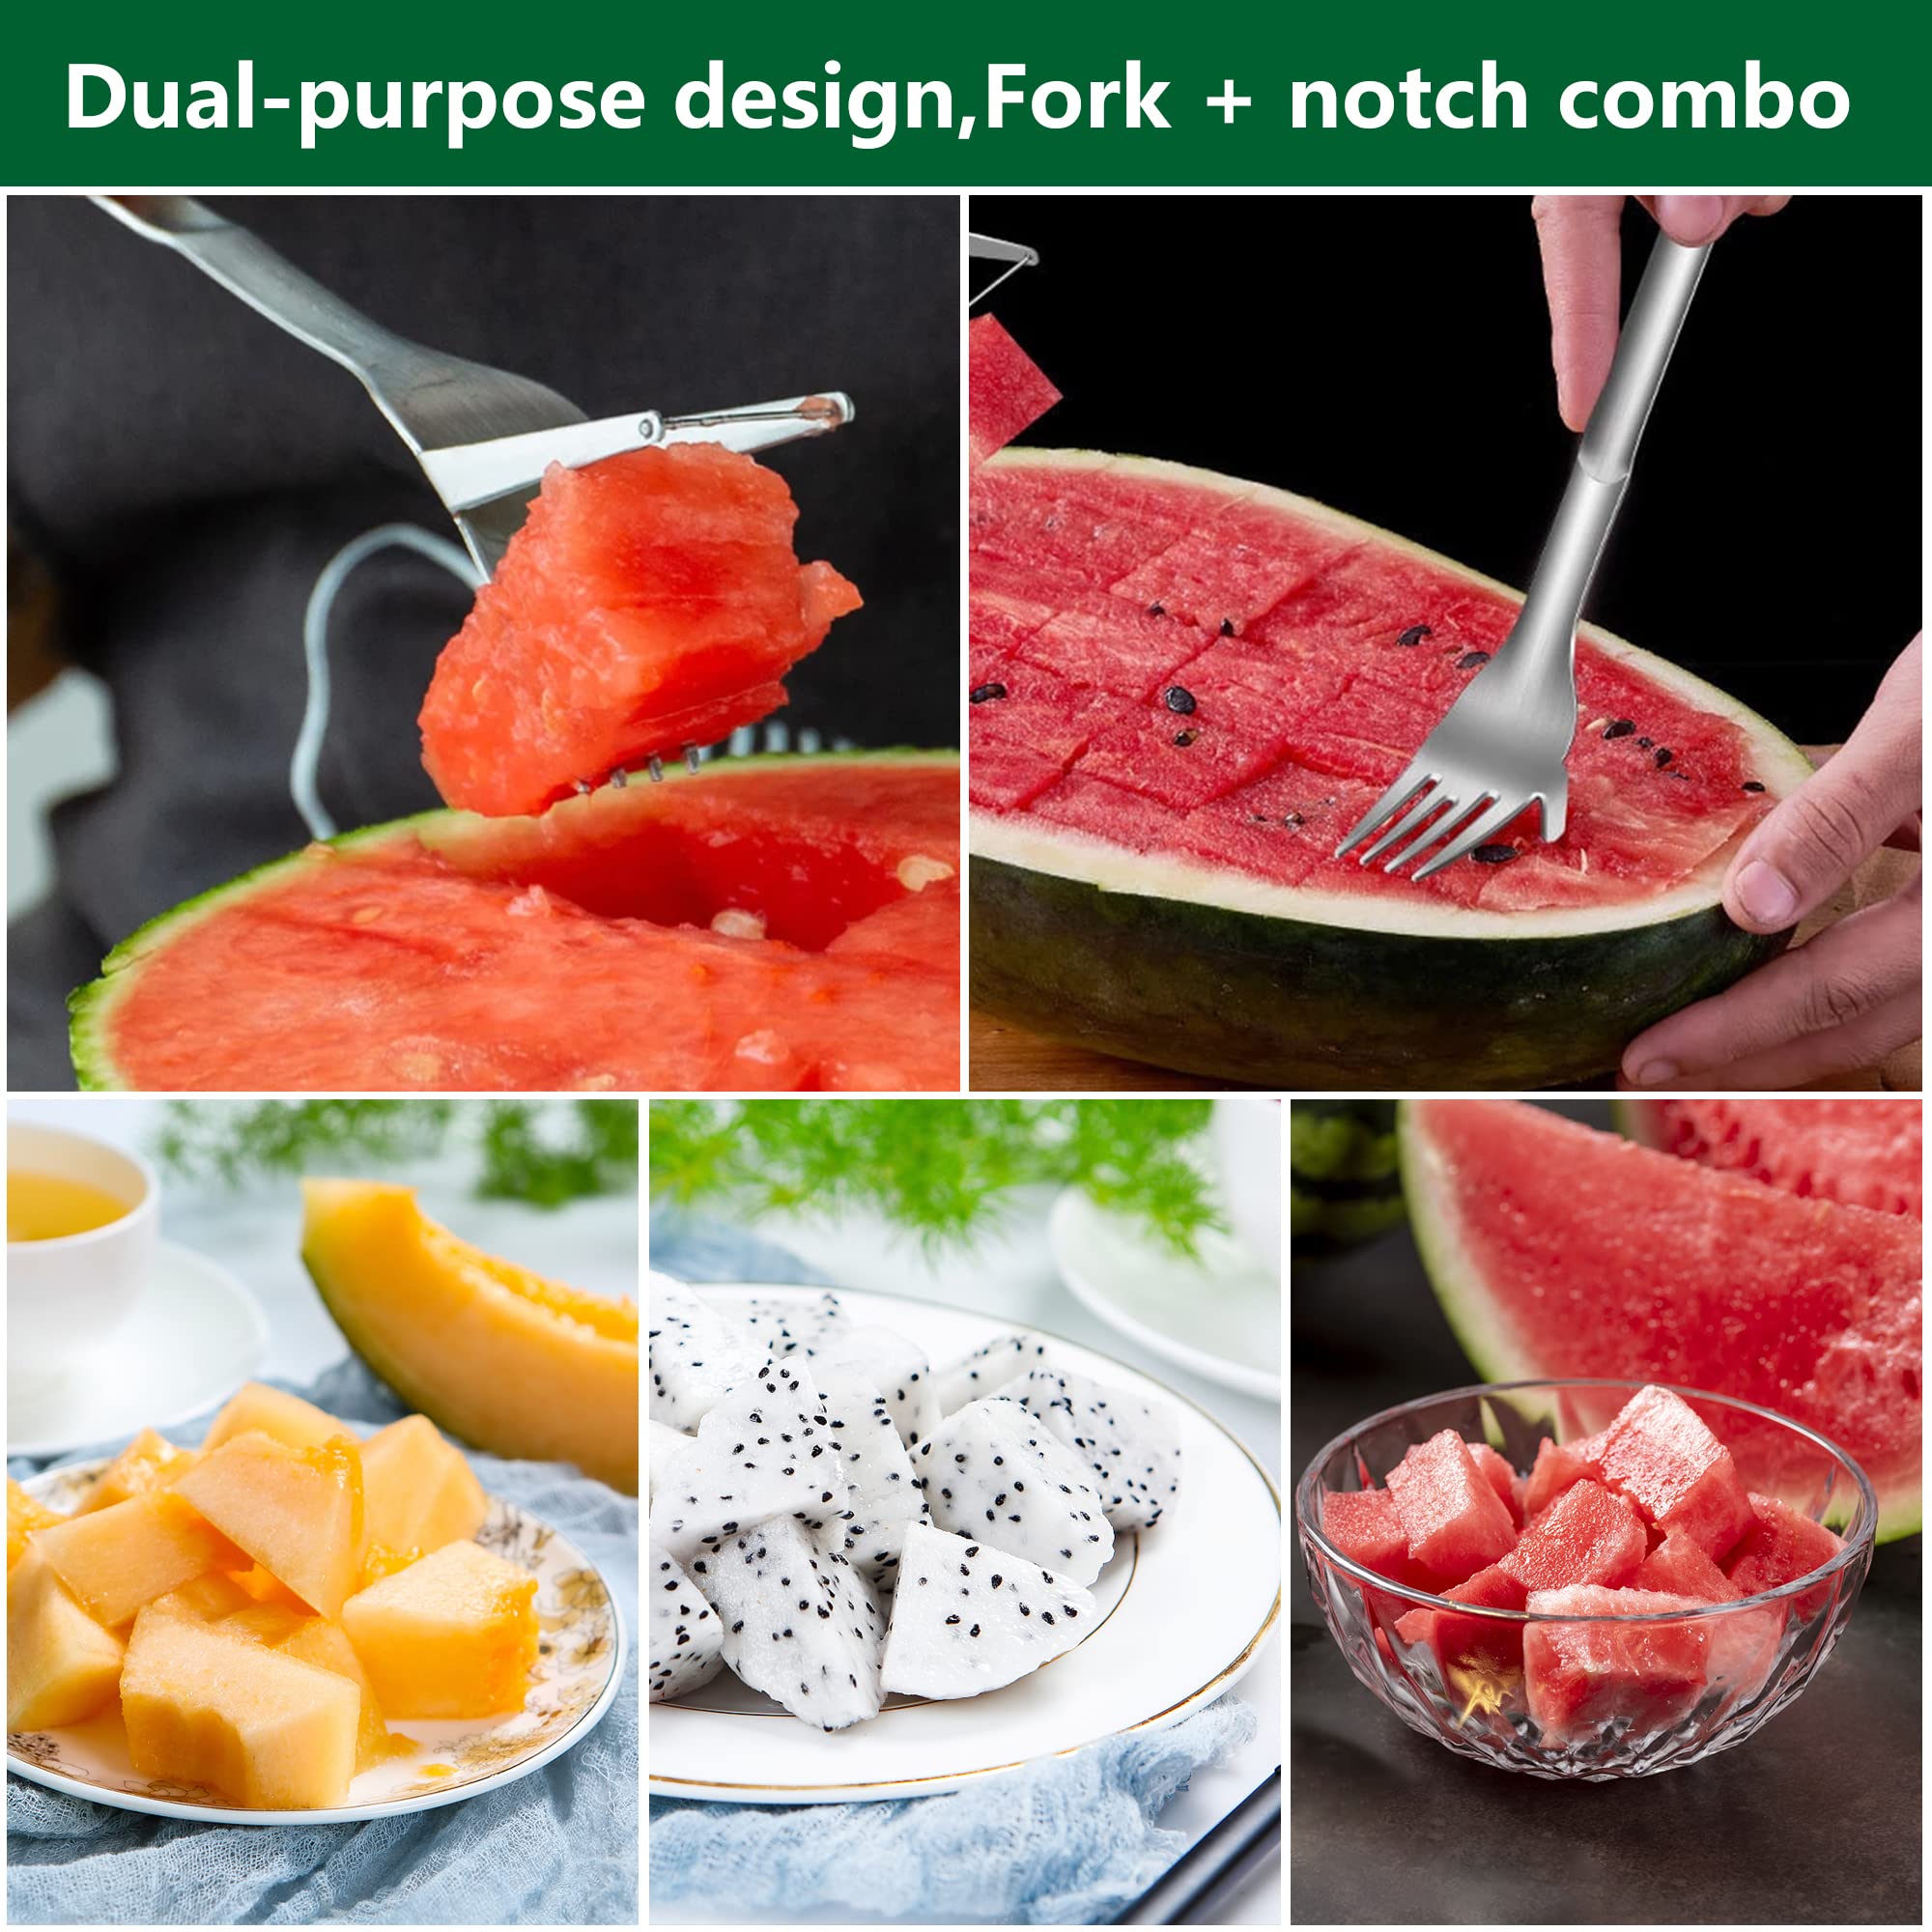 Abnaok 3PCS Watermelon Slicer Cutter, 2-in-1 Watermelon Fork Slicer, Summer Watermelon Cutting Artifact, Stainless Steel Fruit Forks Slicer Knife for Family Parties Camping